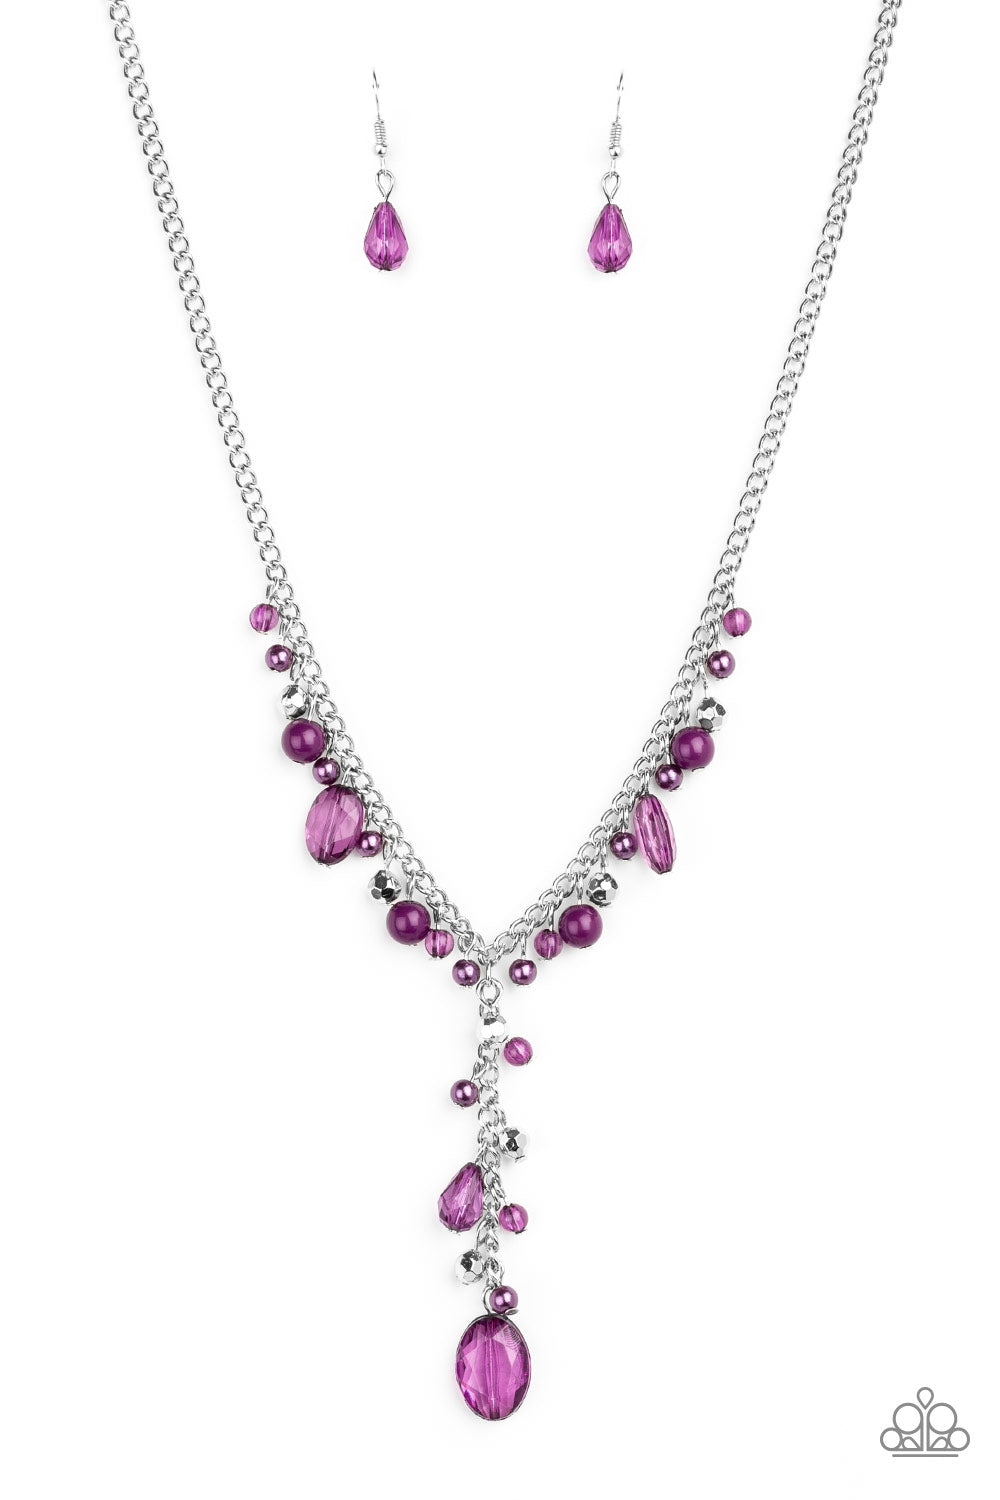 CRYSTAL COUTURE - PURPLE NECKLACE